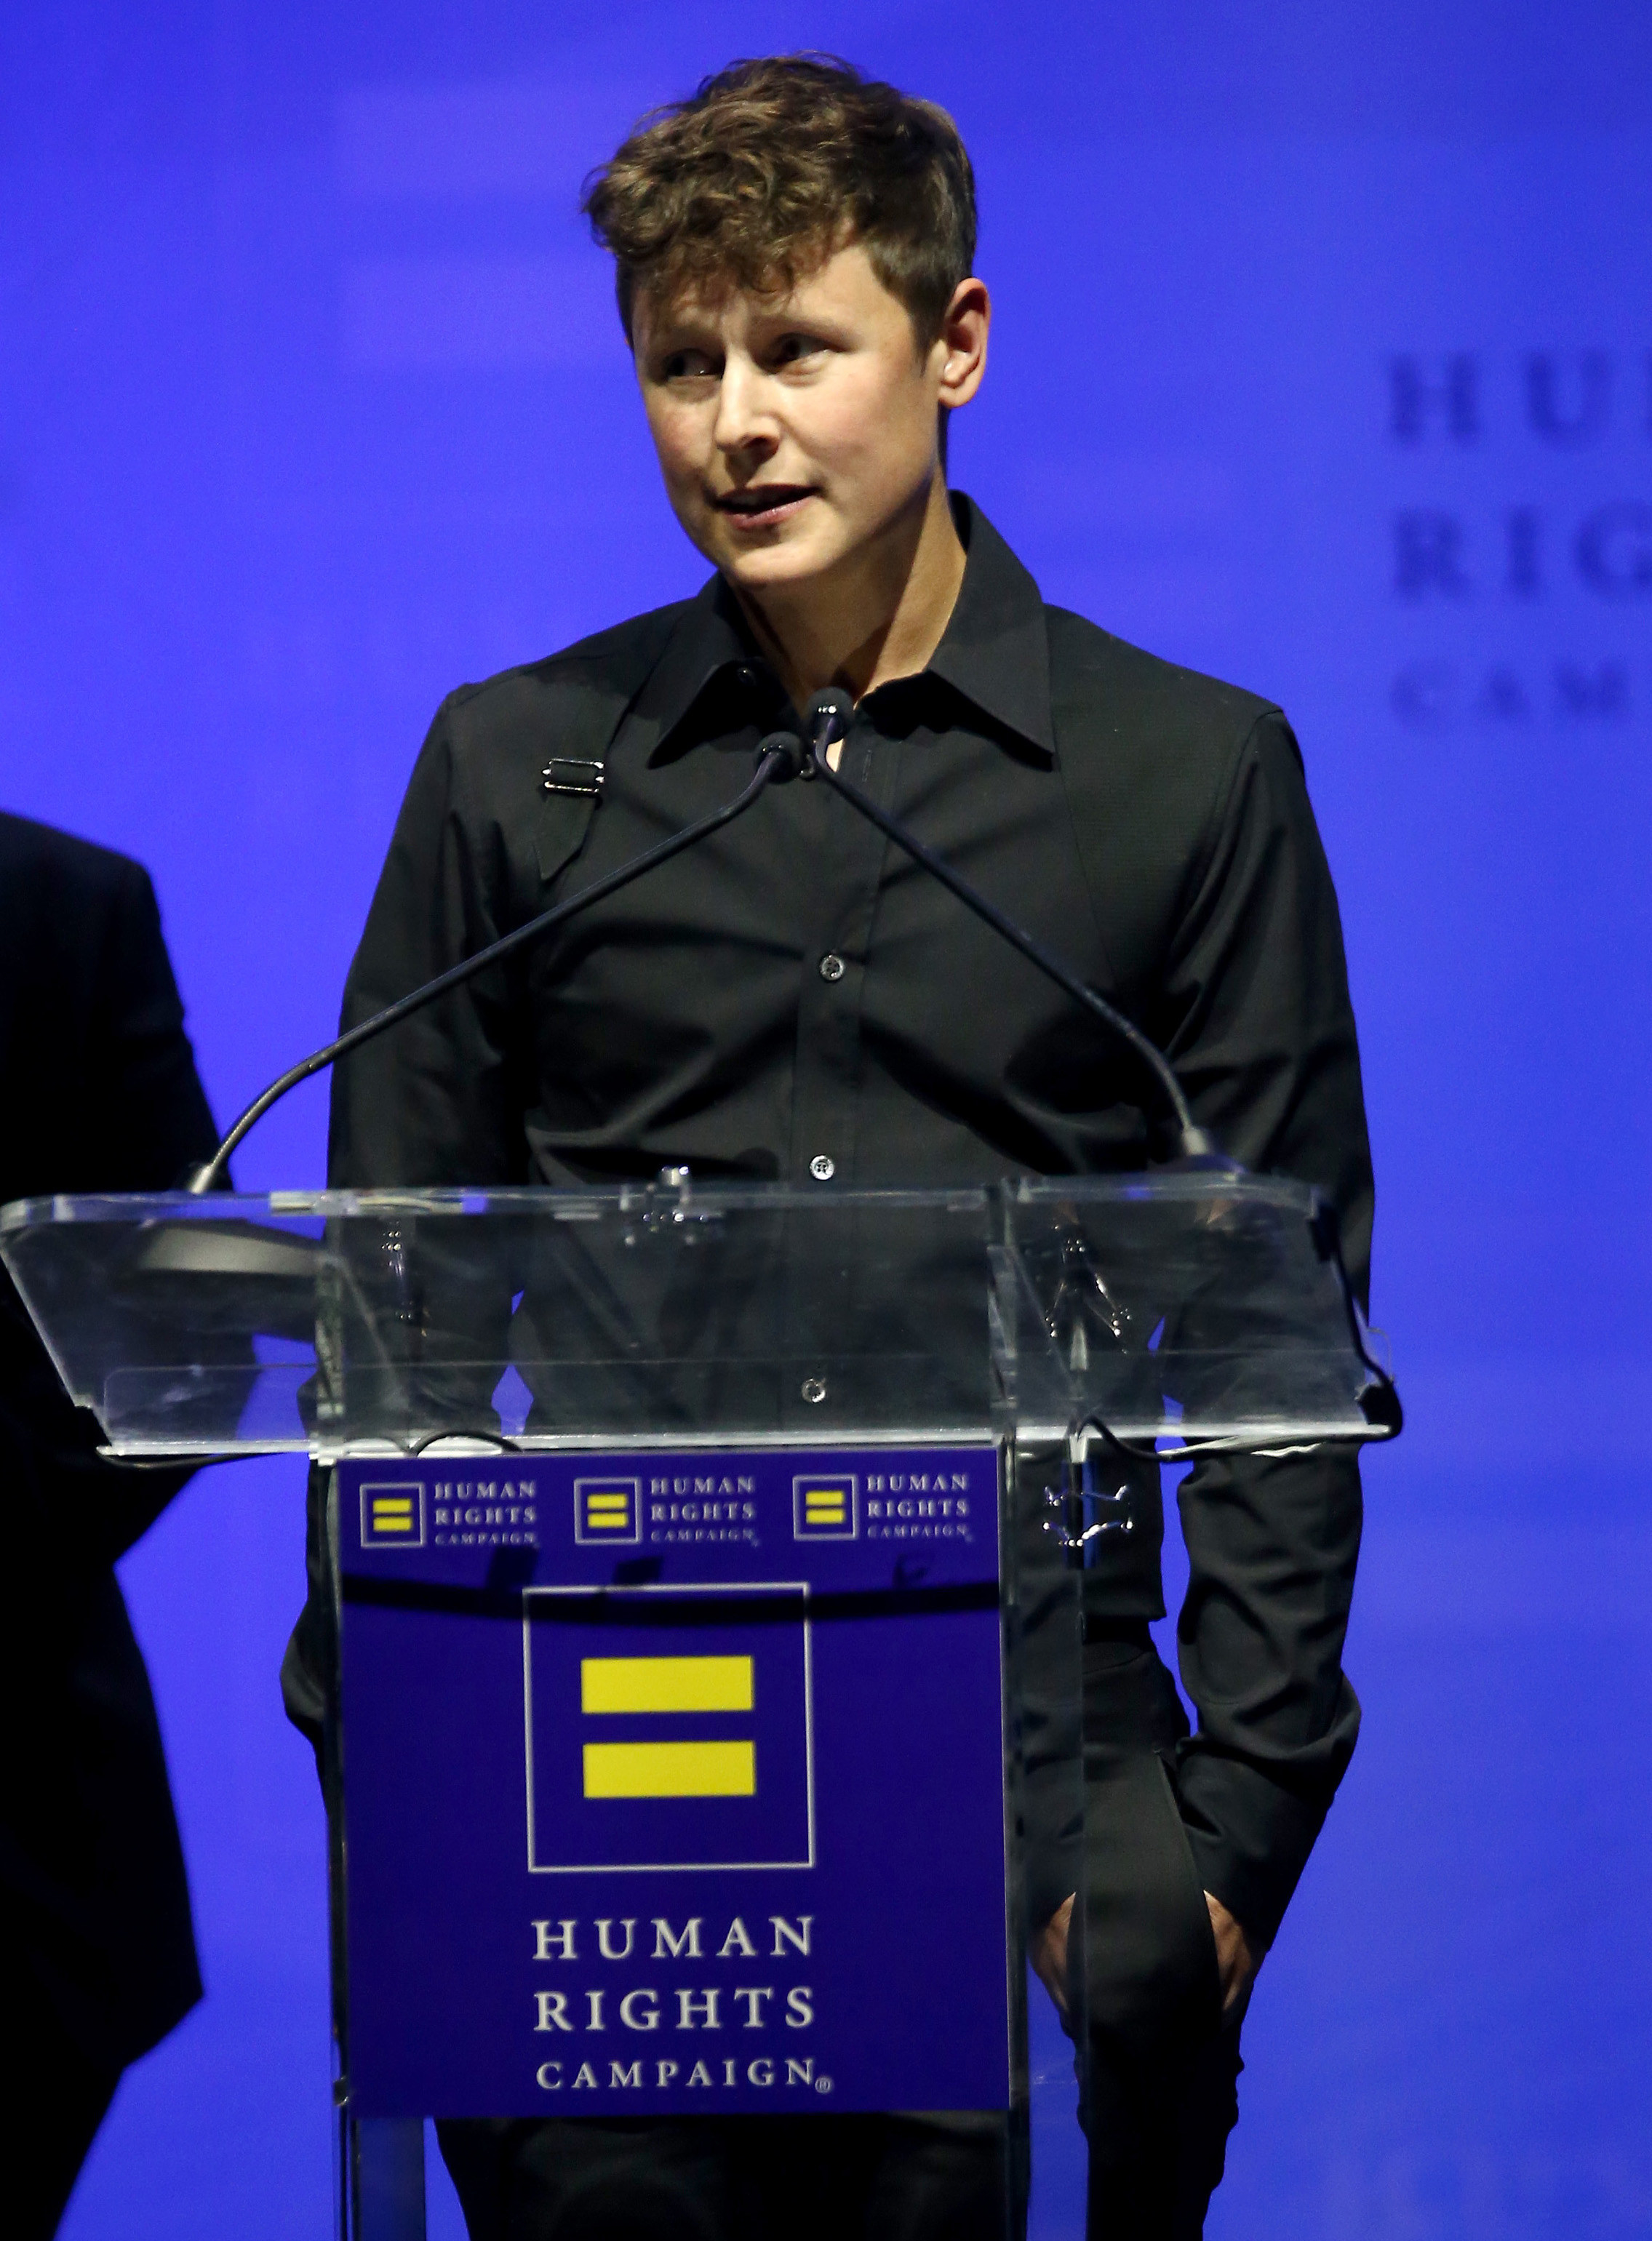 Charlee speaking at a Human Rights Campaign event